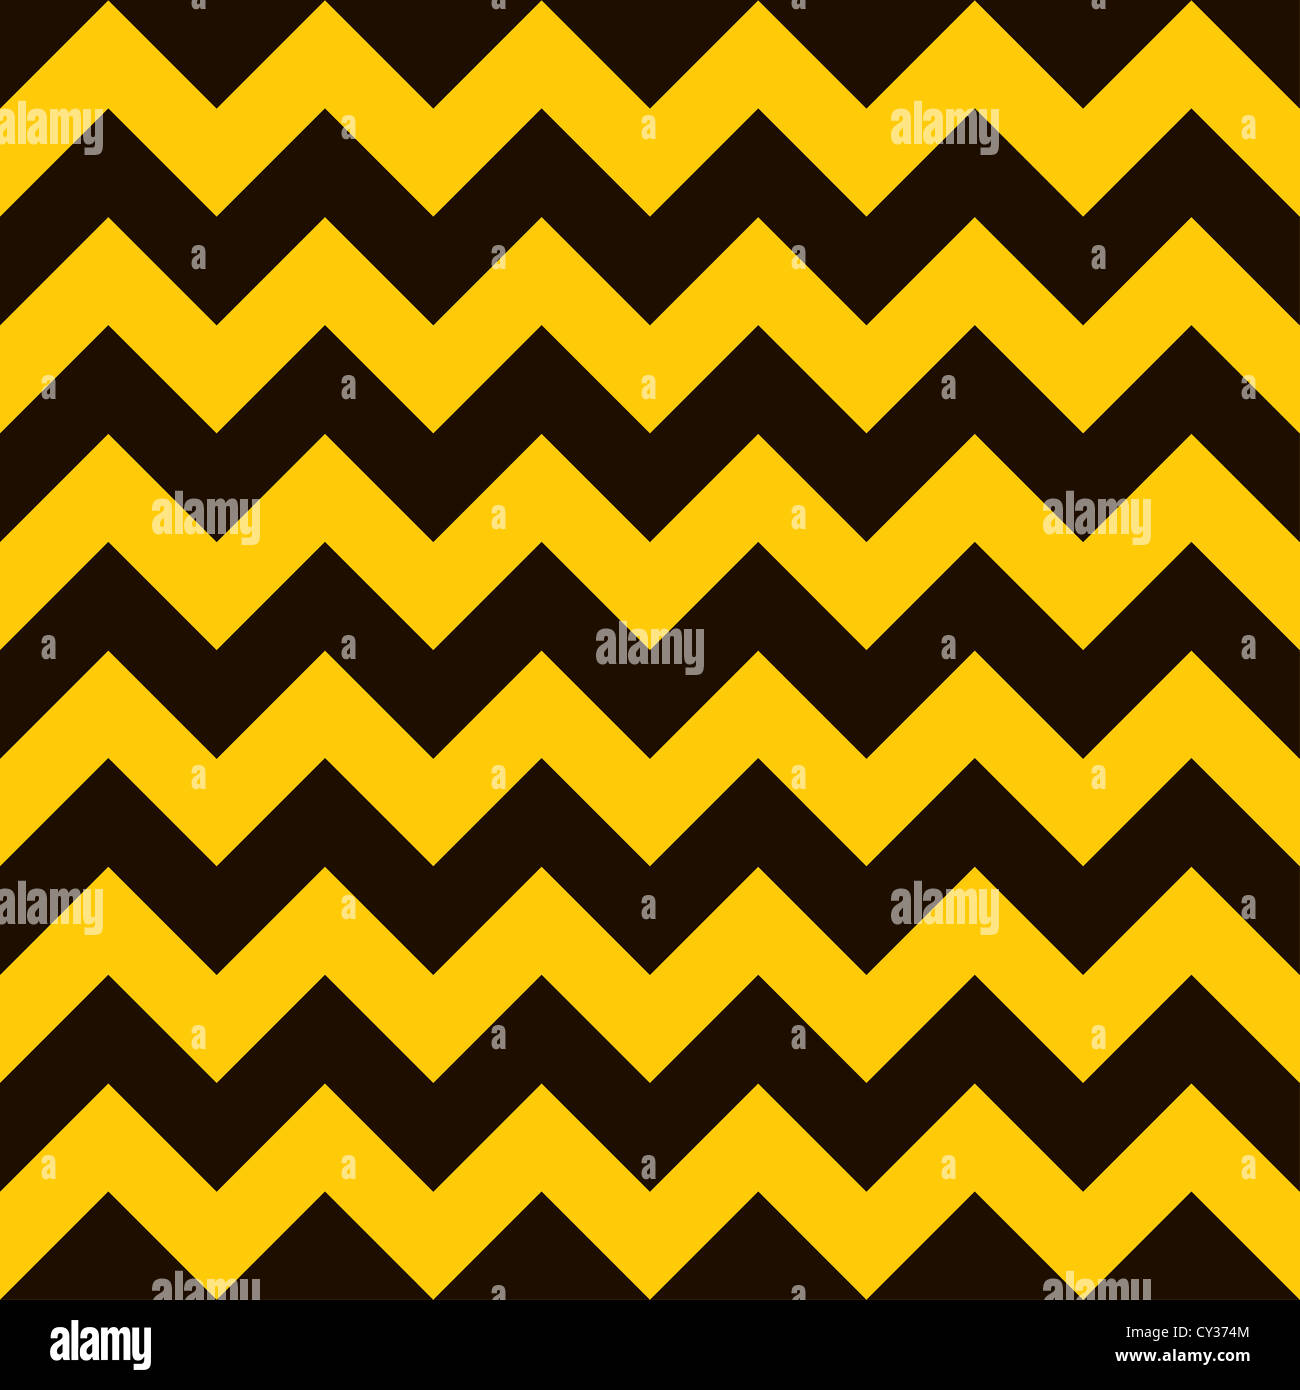 Yellow and black warning seamless tile background with chevron Stock Photo